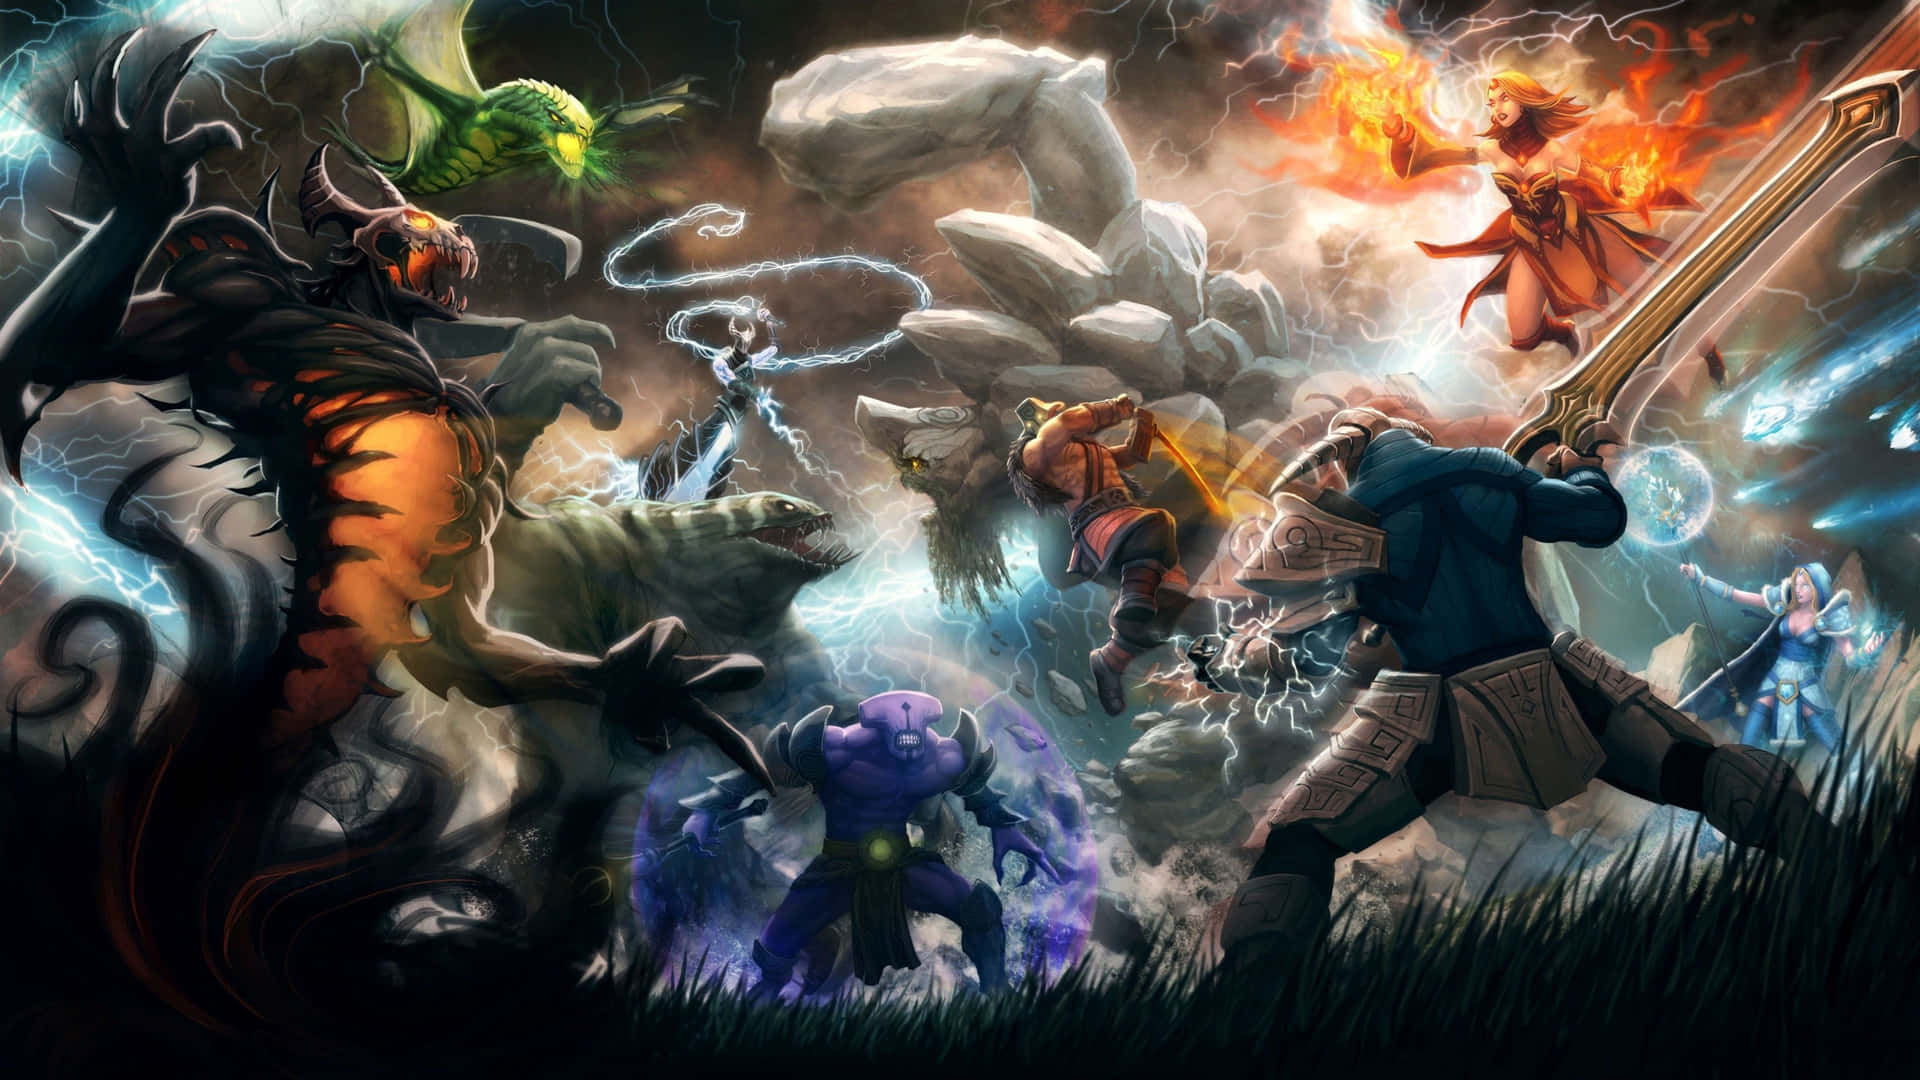 Hd Dota 2 Background Heroes In Action Background